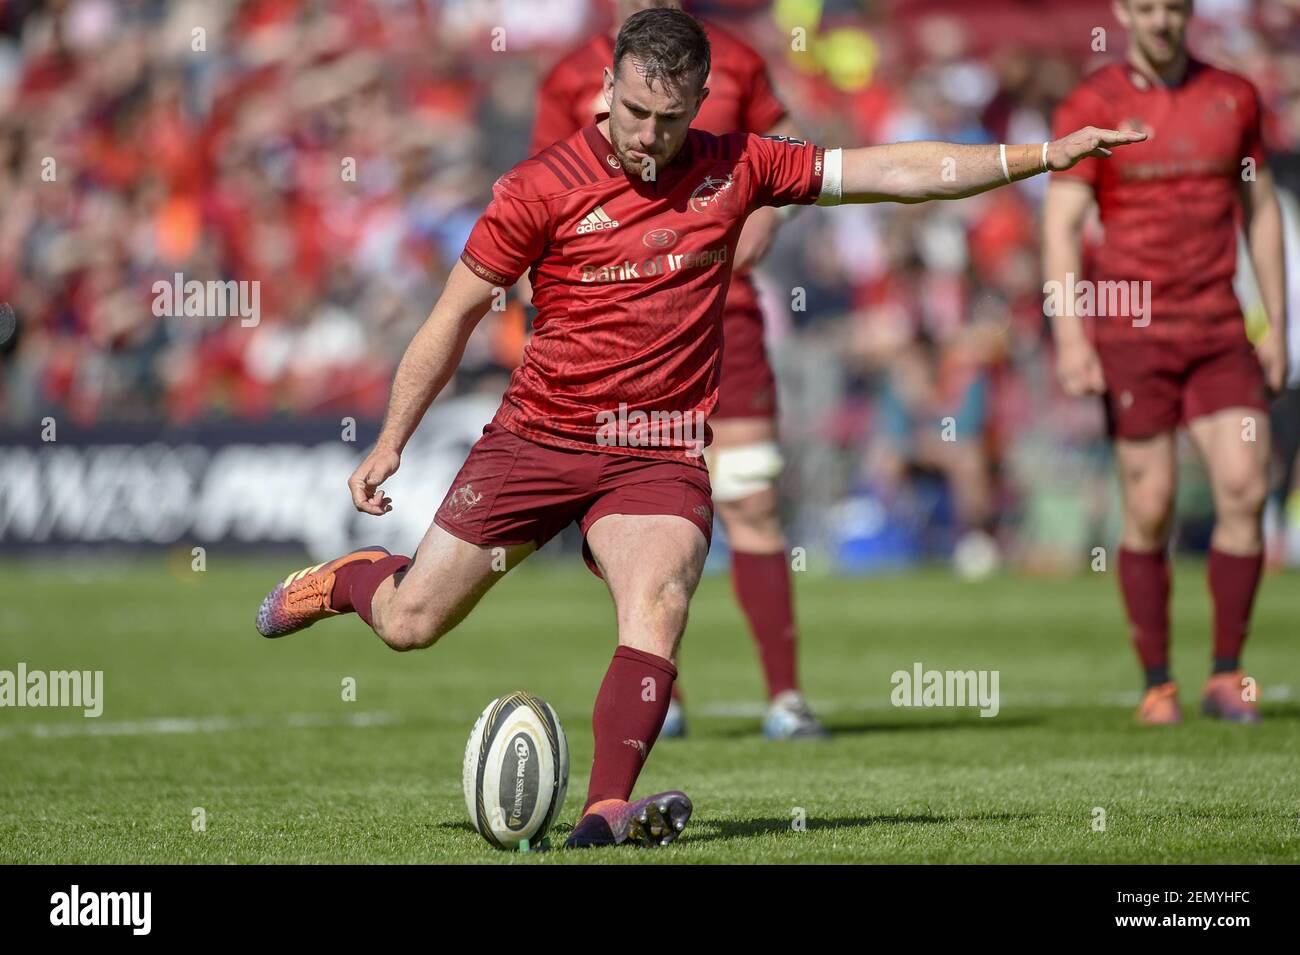 JJ Hanrahan of Munster kicks a penalty during the Guinness PRO14  Quarter-Final match between Munster Rugby and Benetton Treviso at Thomond  Park Stadium in Limerick, Ireland on May 4, 2019 (Photo by